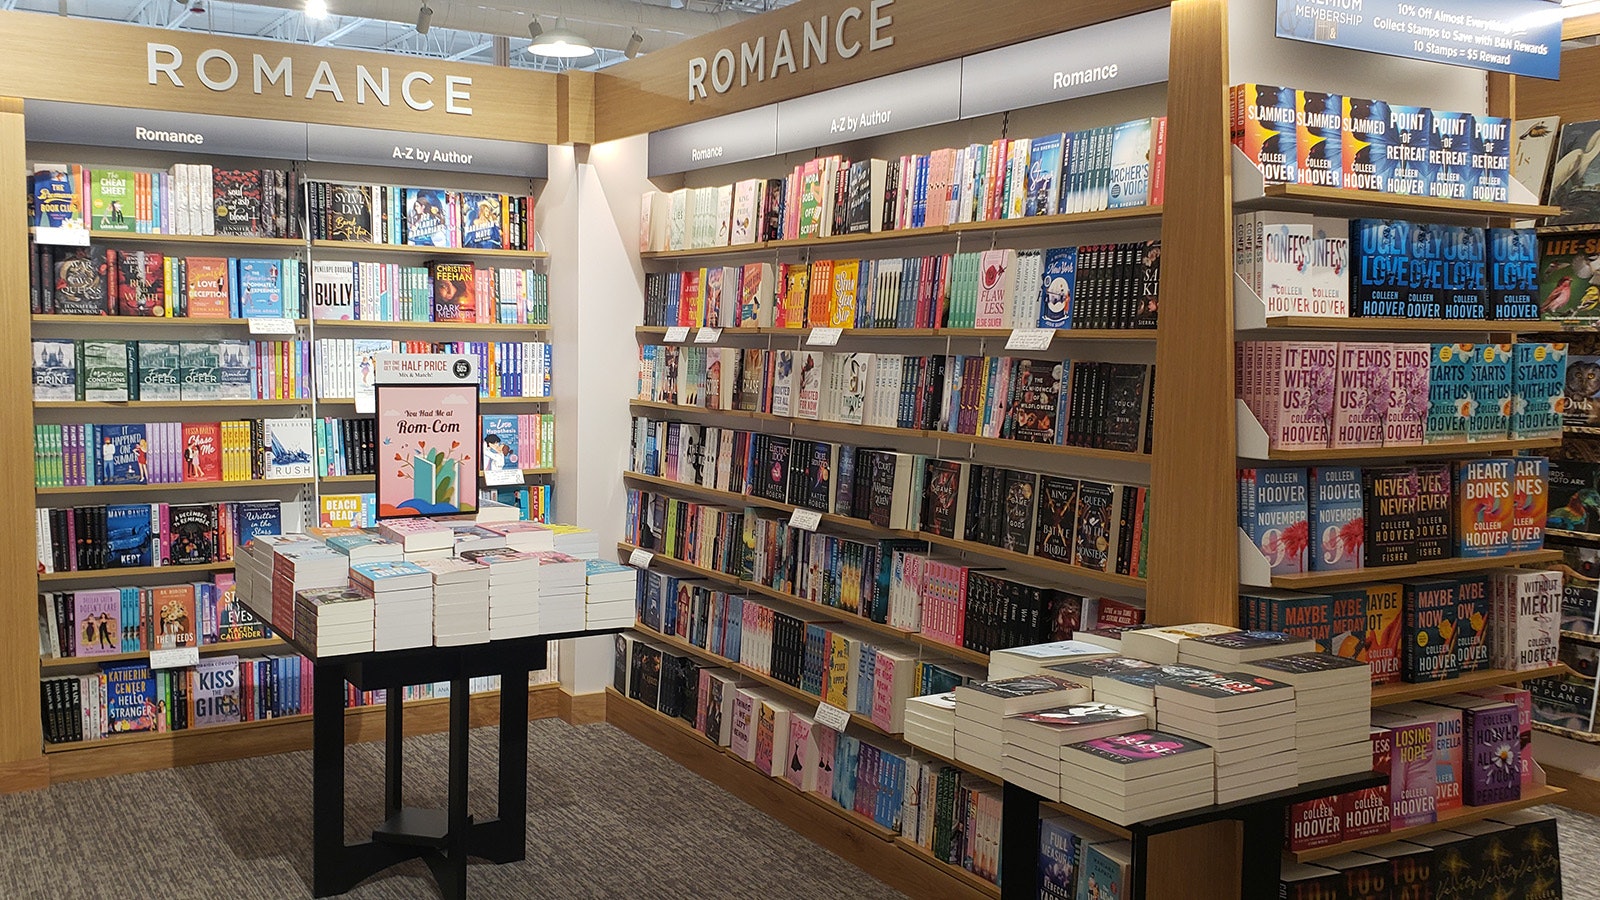 The romance category has been revitalized by indie and self-published authors who leveraged self publishing to become New York Times best-selling authors.